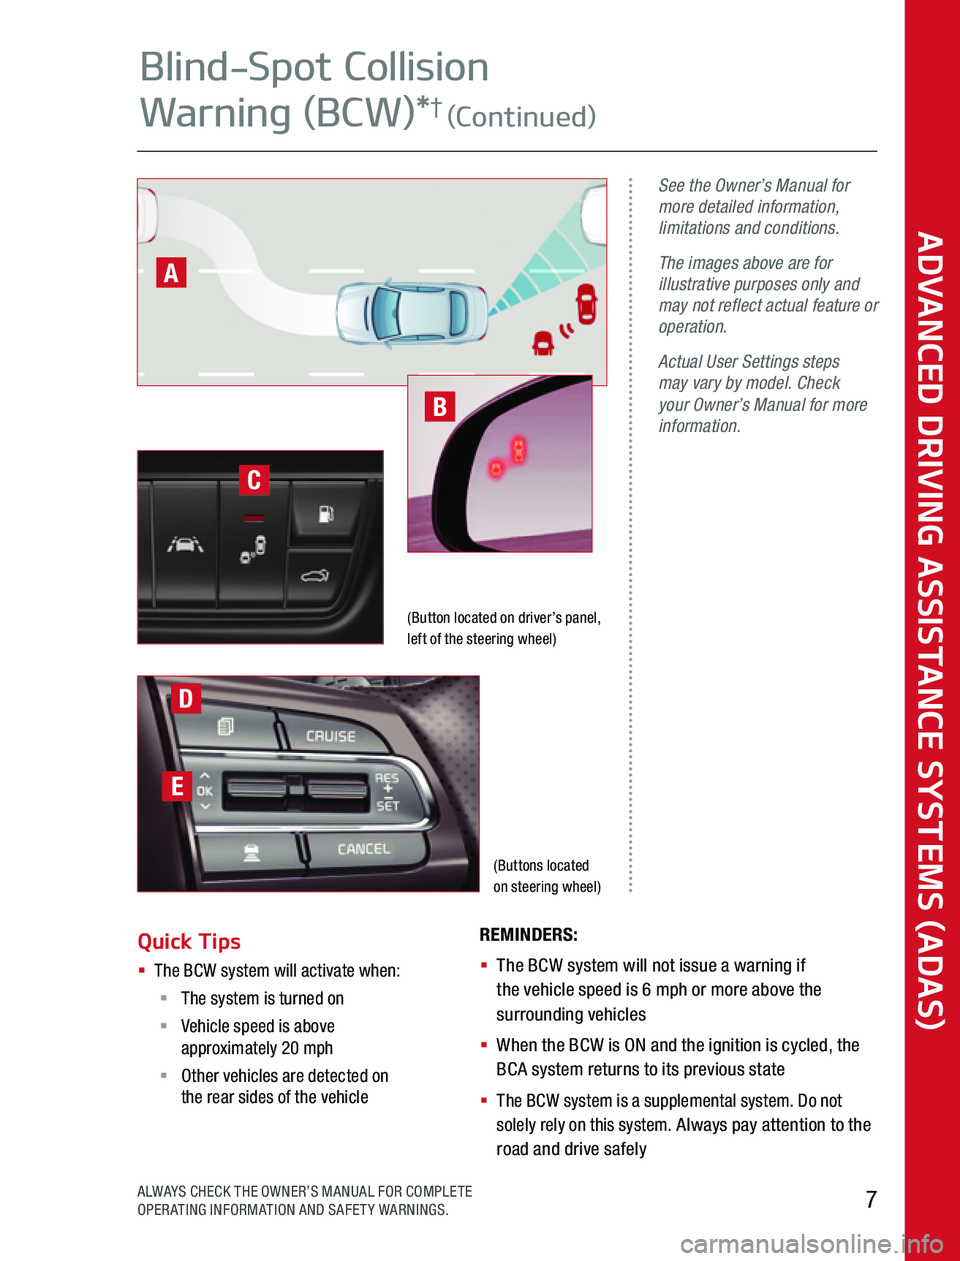 KIA K900 2020  Advanced Driving Assistance System (Buttons located  on steering wheel)
See the Owner’s Manual for more detailed information, limitations and conditions.
The images above are for illustrative purposes only and may not reflect actual 